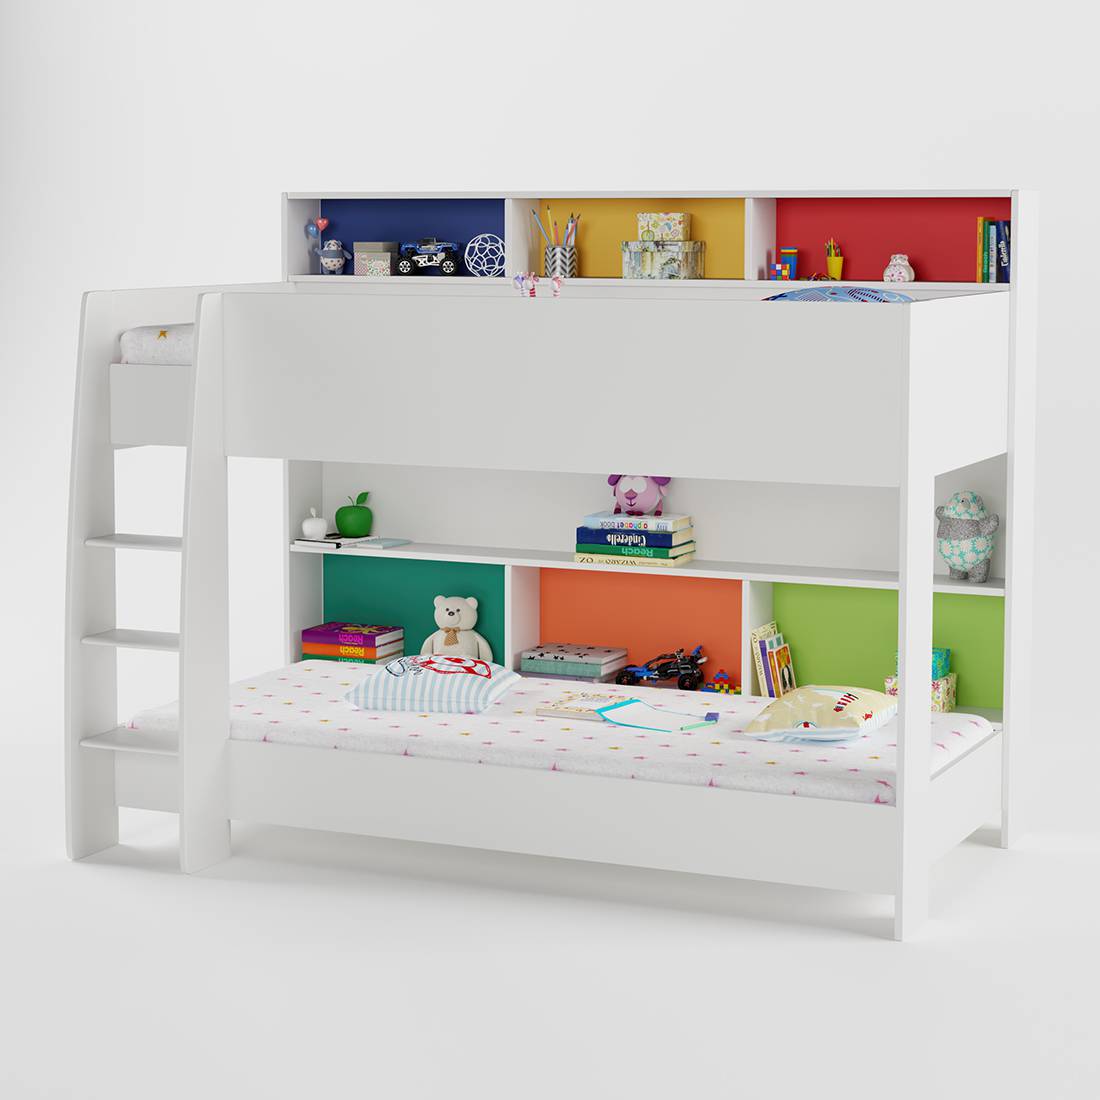 Bunk Bed Beds In India, Bunk Bed With Wardrobe And Drawers